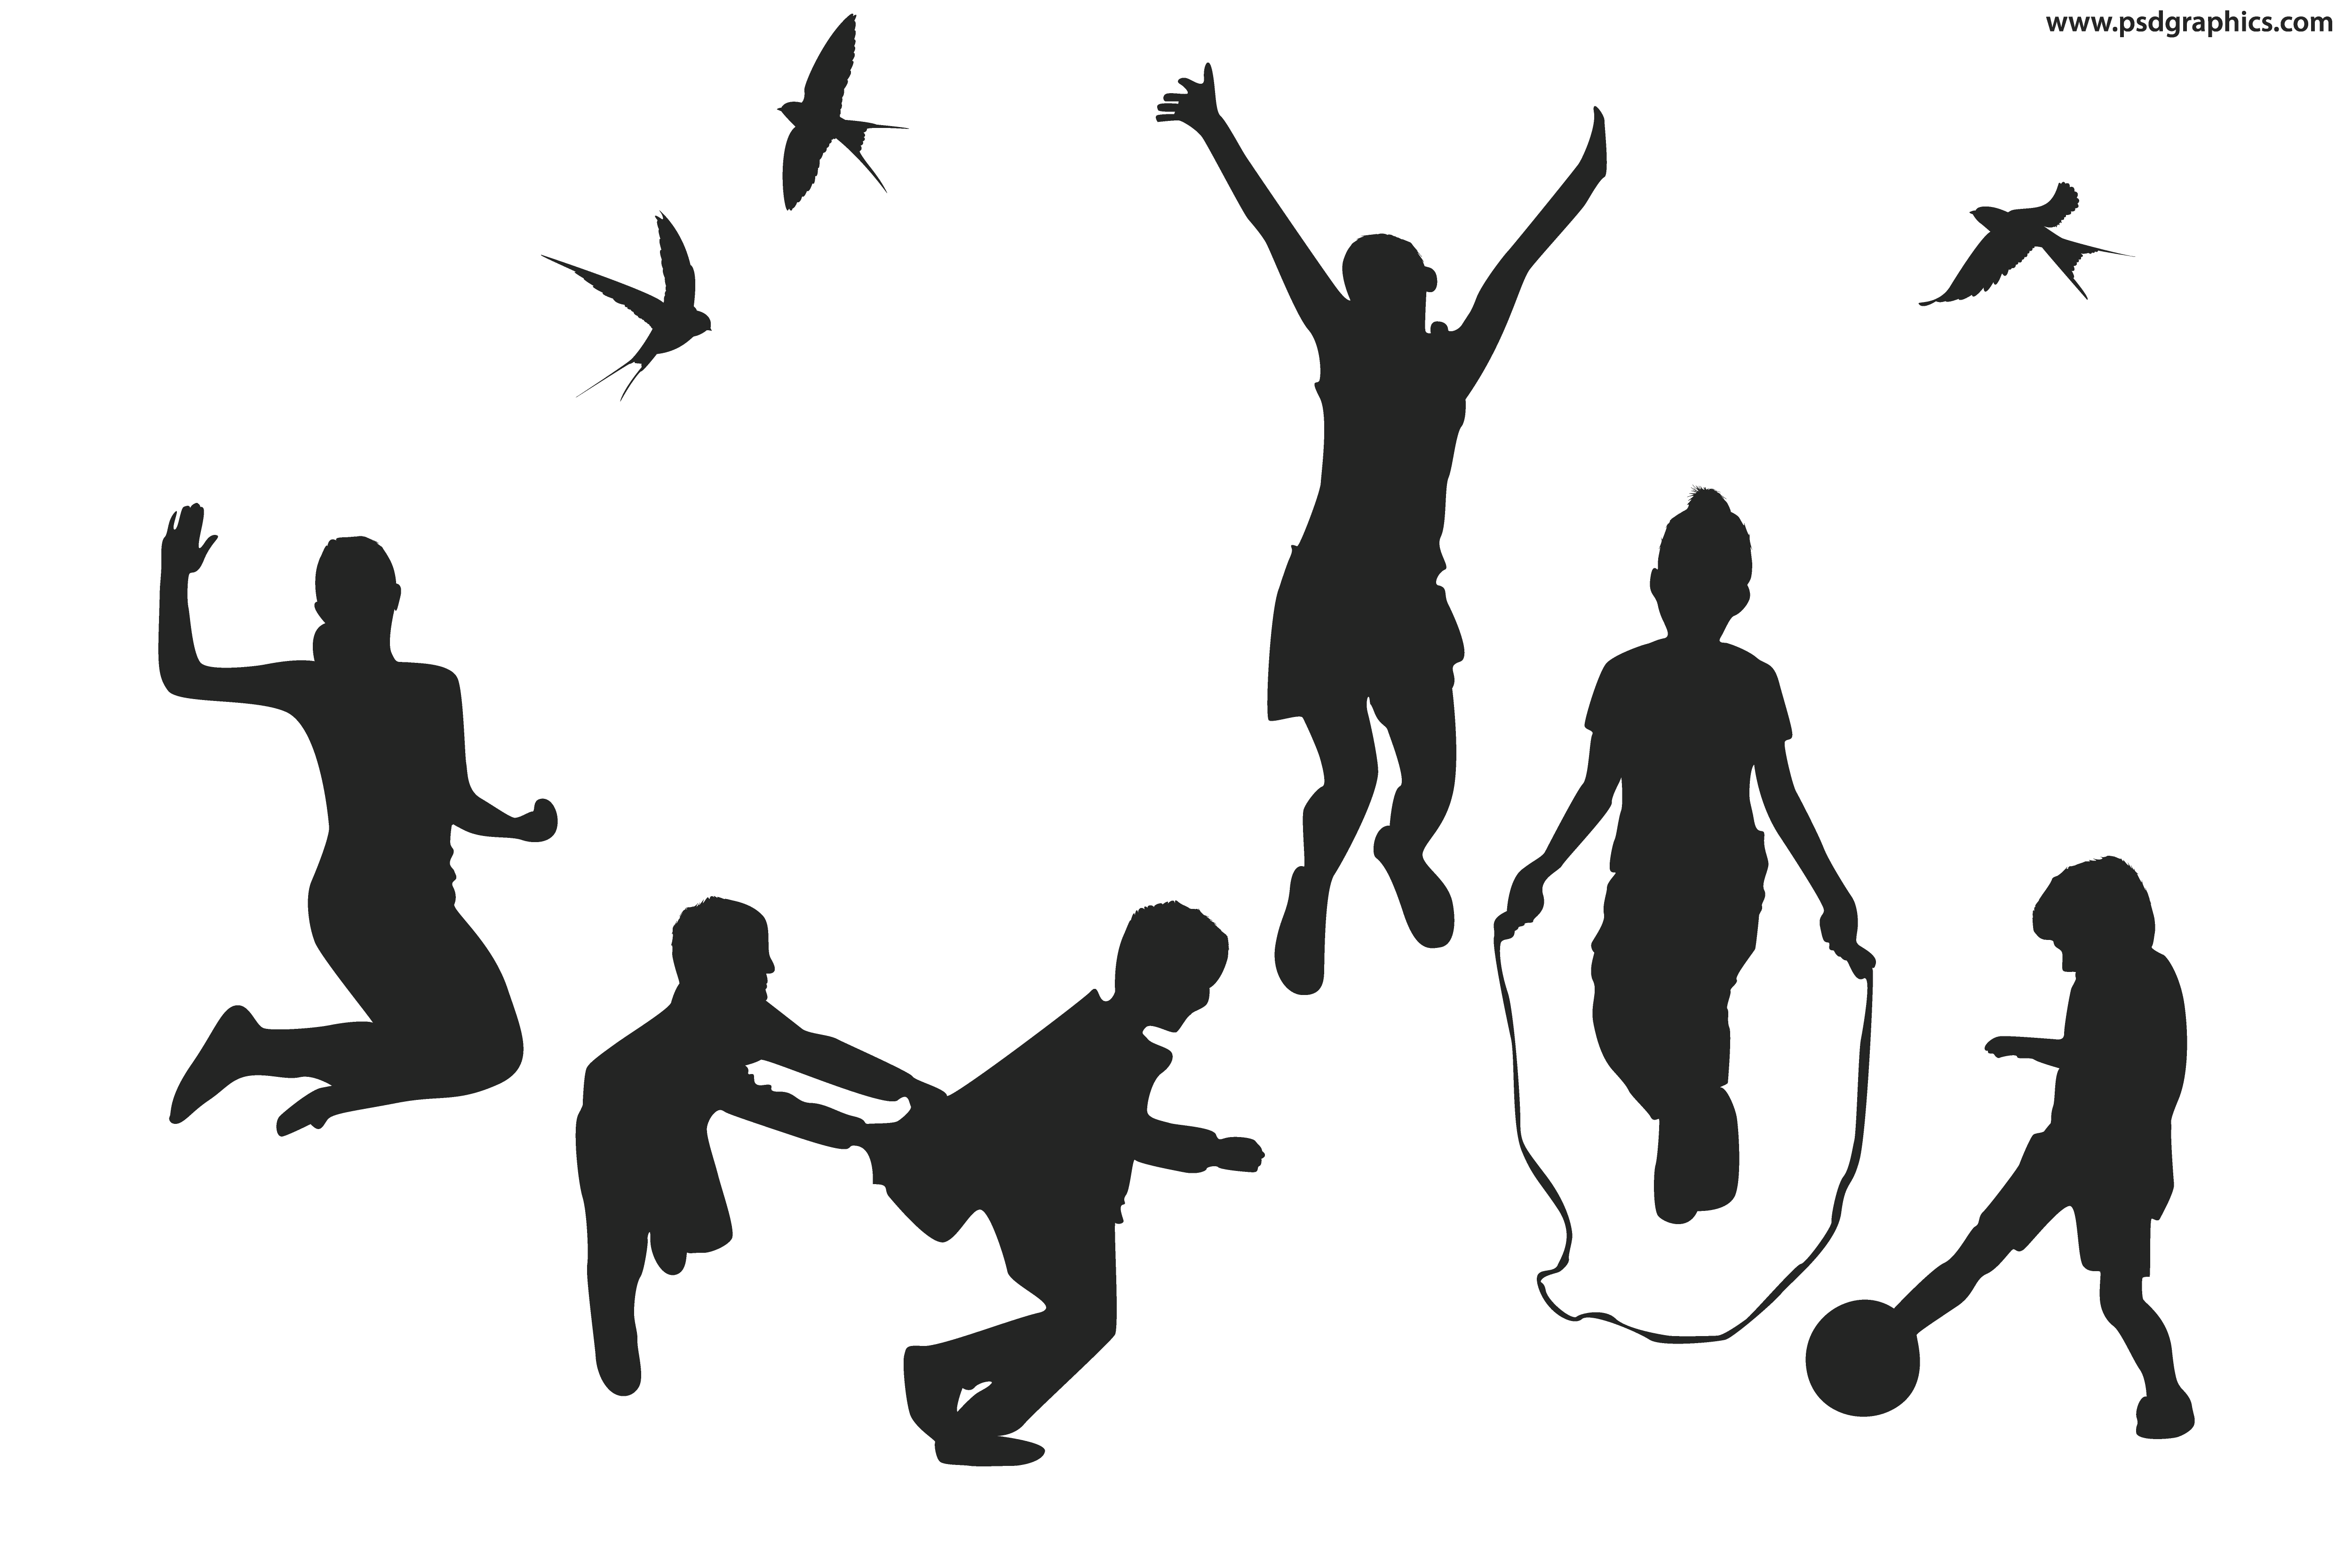 Pills clipart silhouette. Kids playing at getdrawings